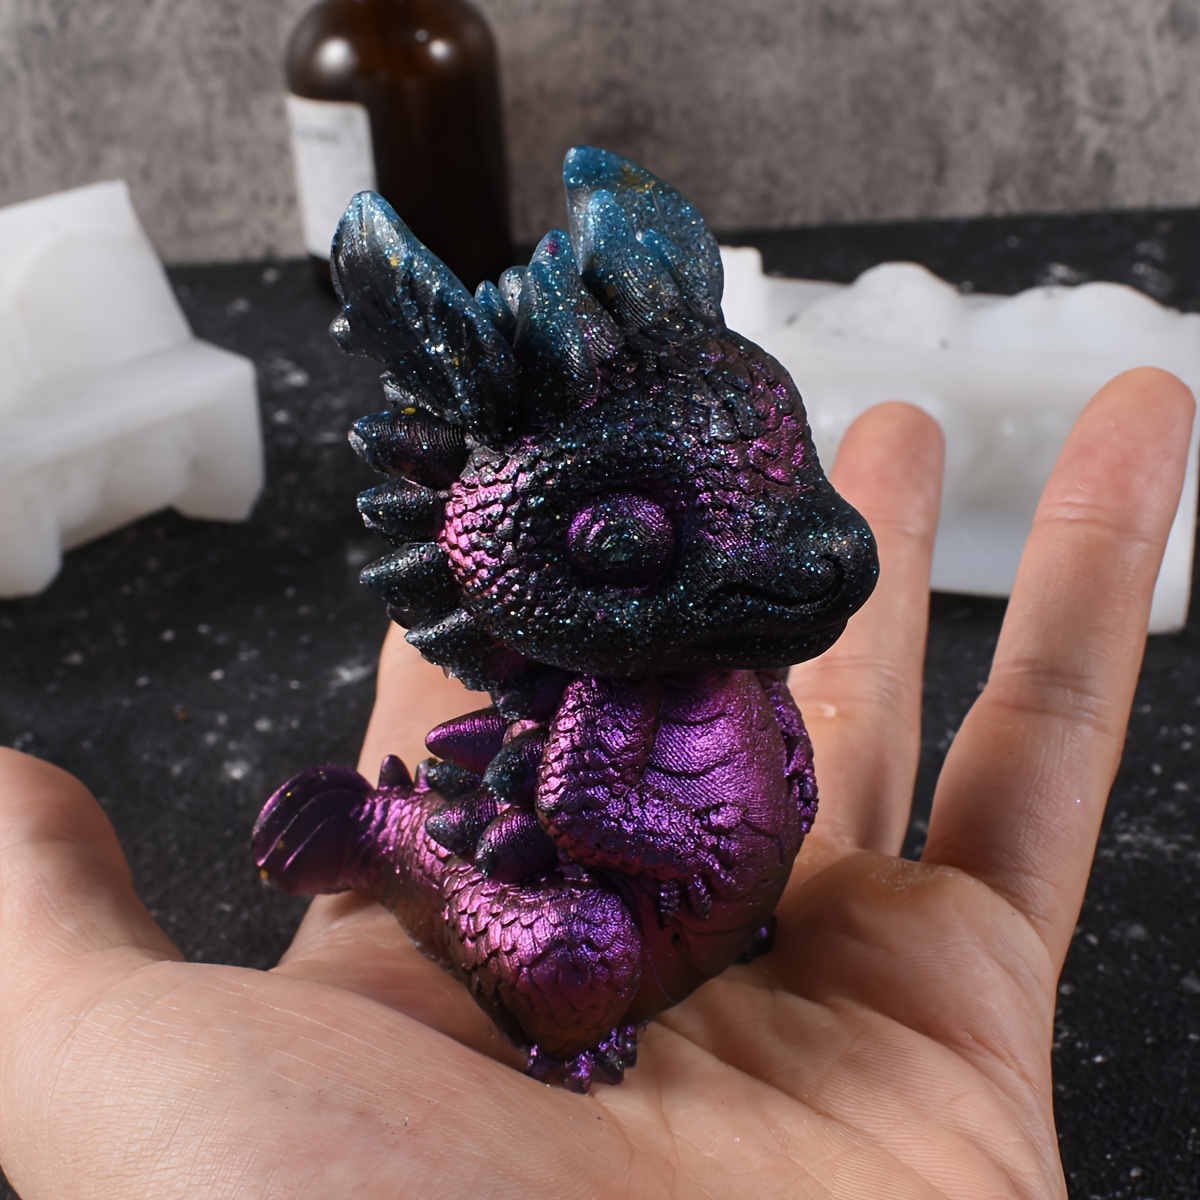 

Dragon Baby Silicone Mold For Resin Crafts - Cute Epoxy Casting Molds For Diy Projects, Clay Crafting & Home Decor